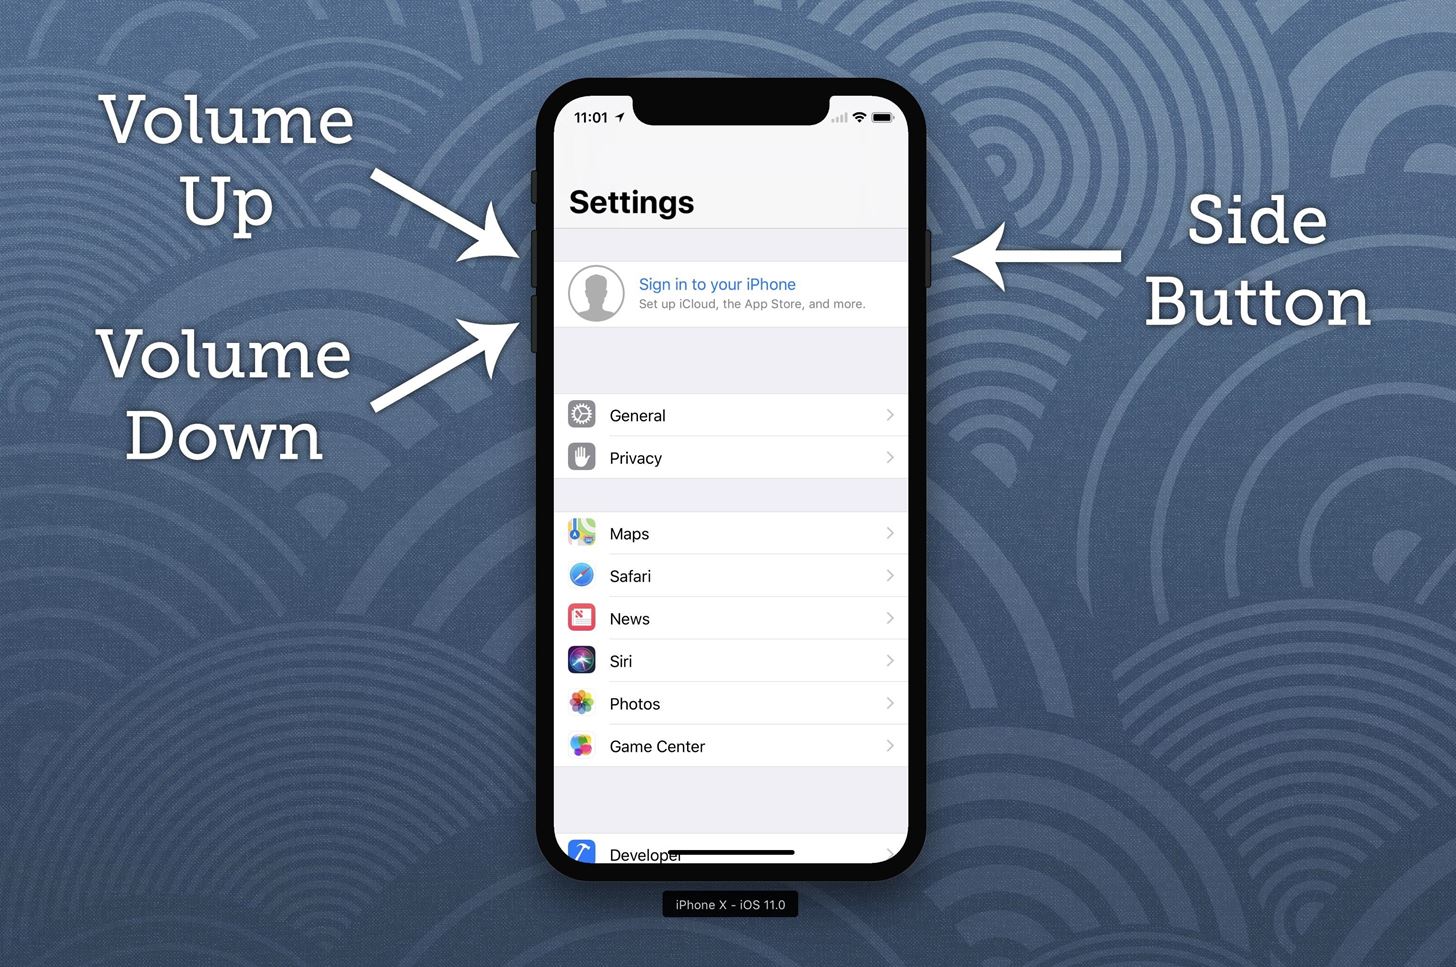 Seven Tricks Every iPhone X Owner Needs To Know